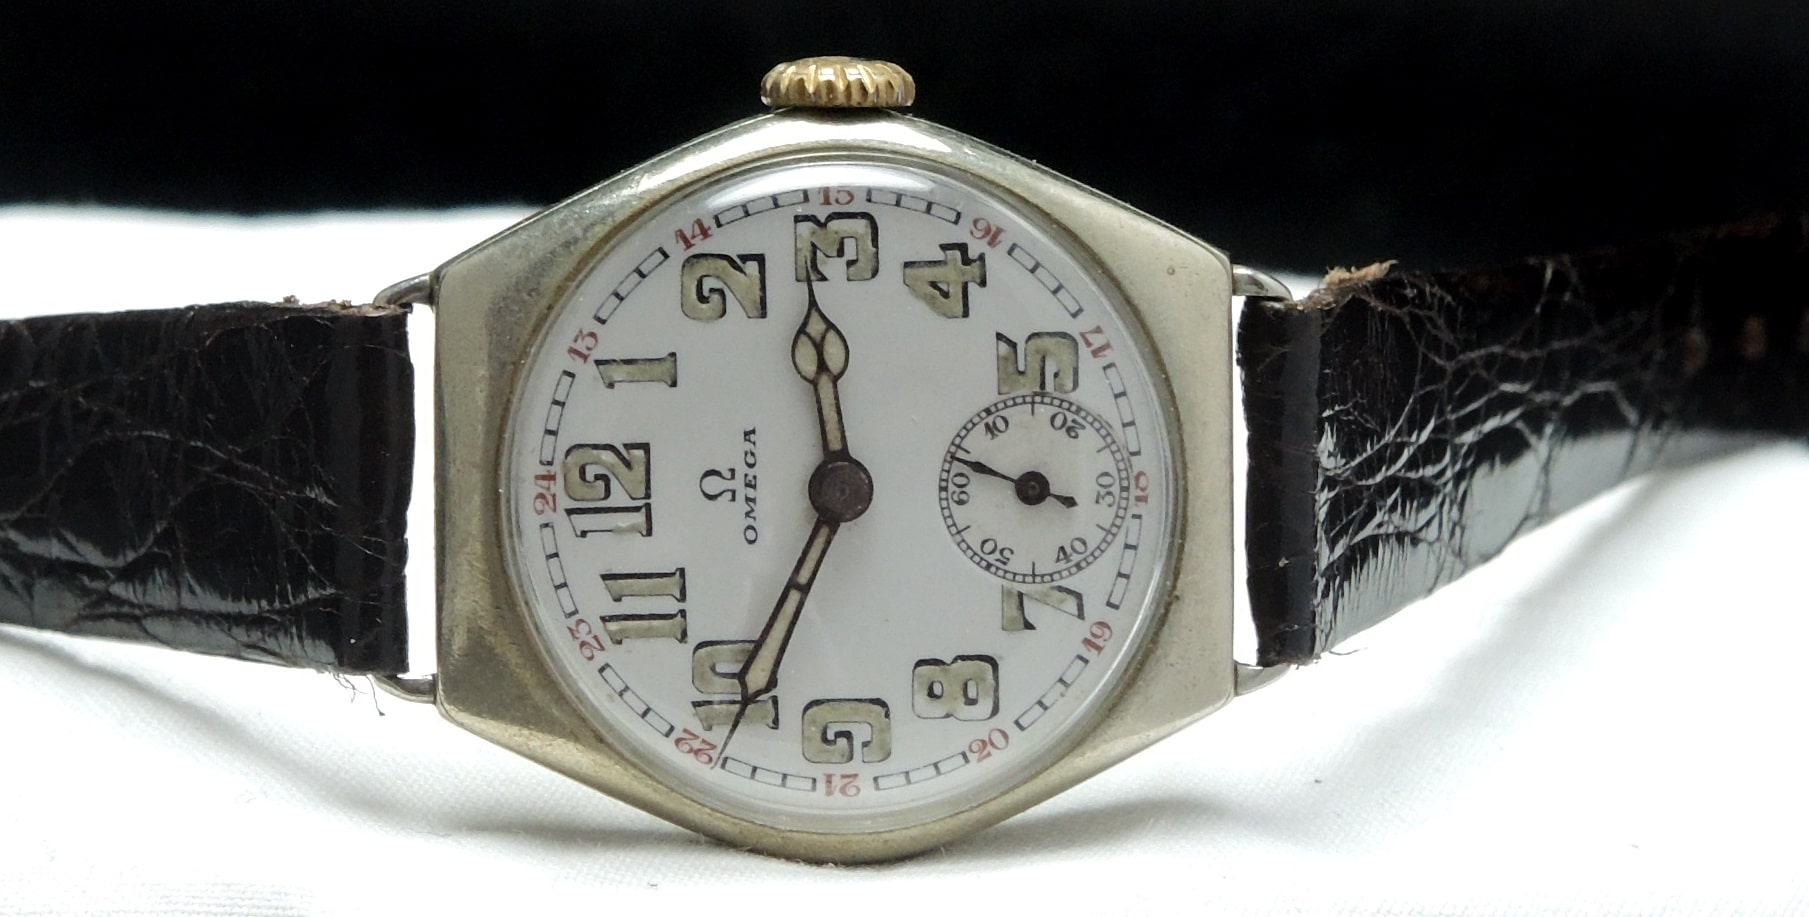 Serviced Omega from the first world war with enamel dial | Vintage ...